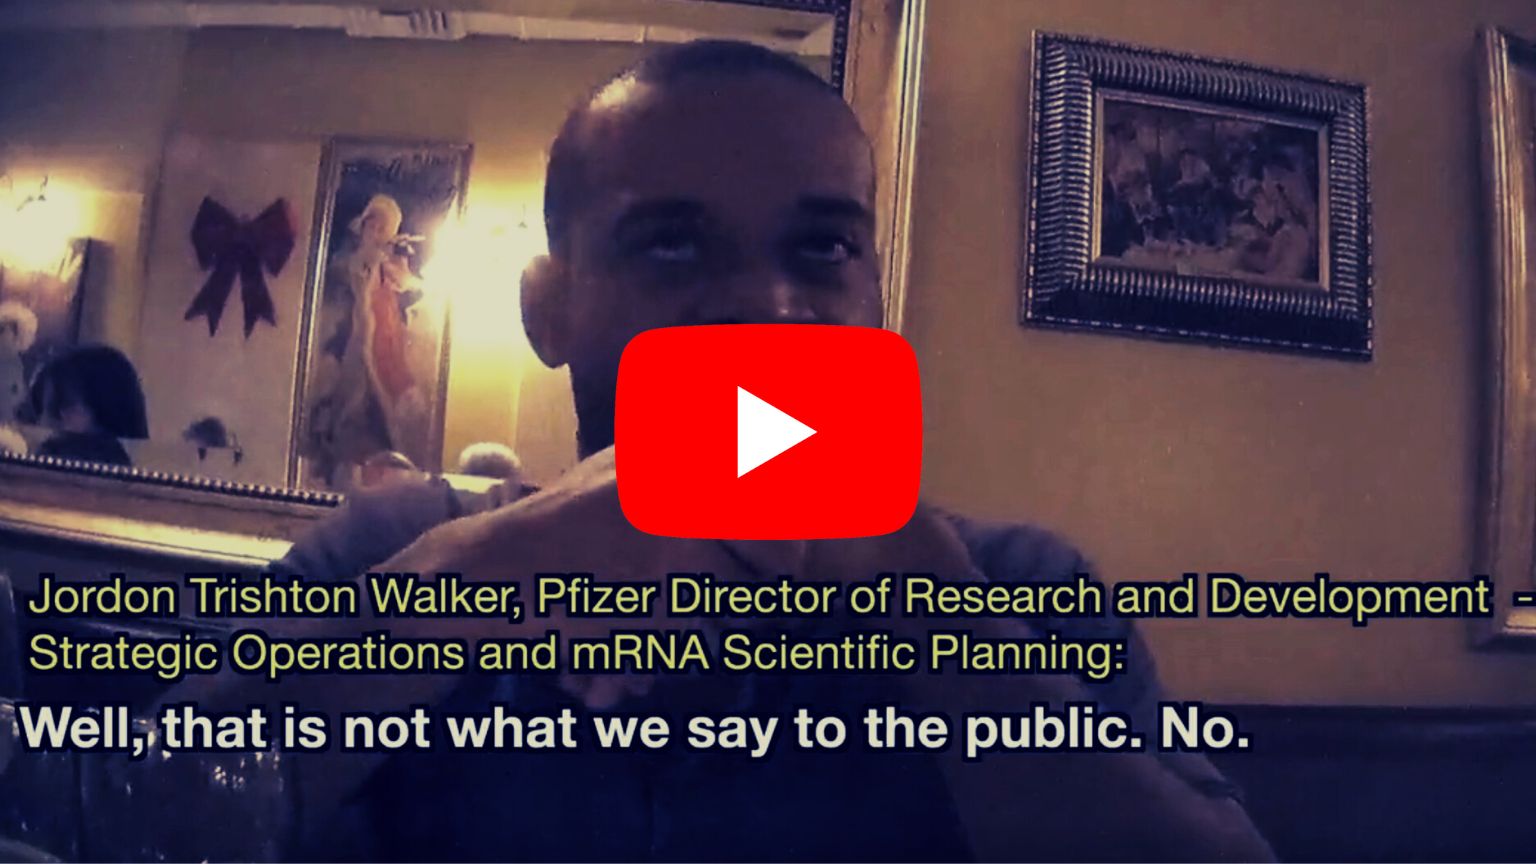 YouTube censors and punishes Project Veritas over undercover Pfizer video